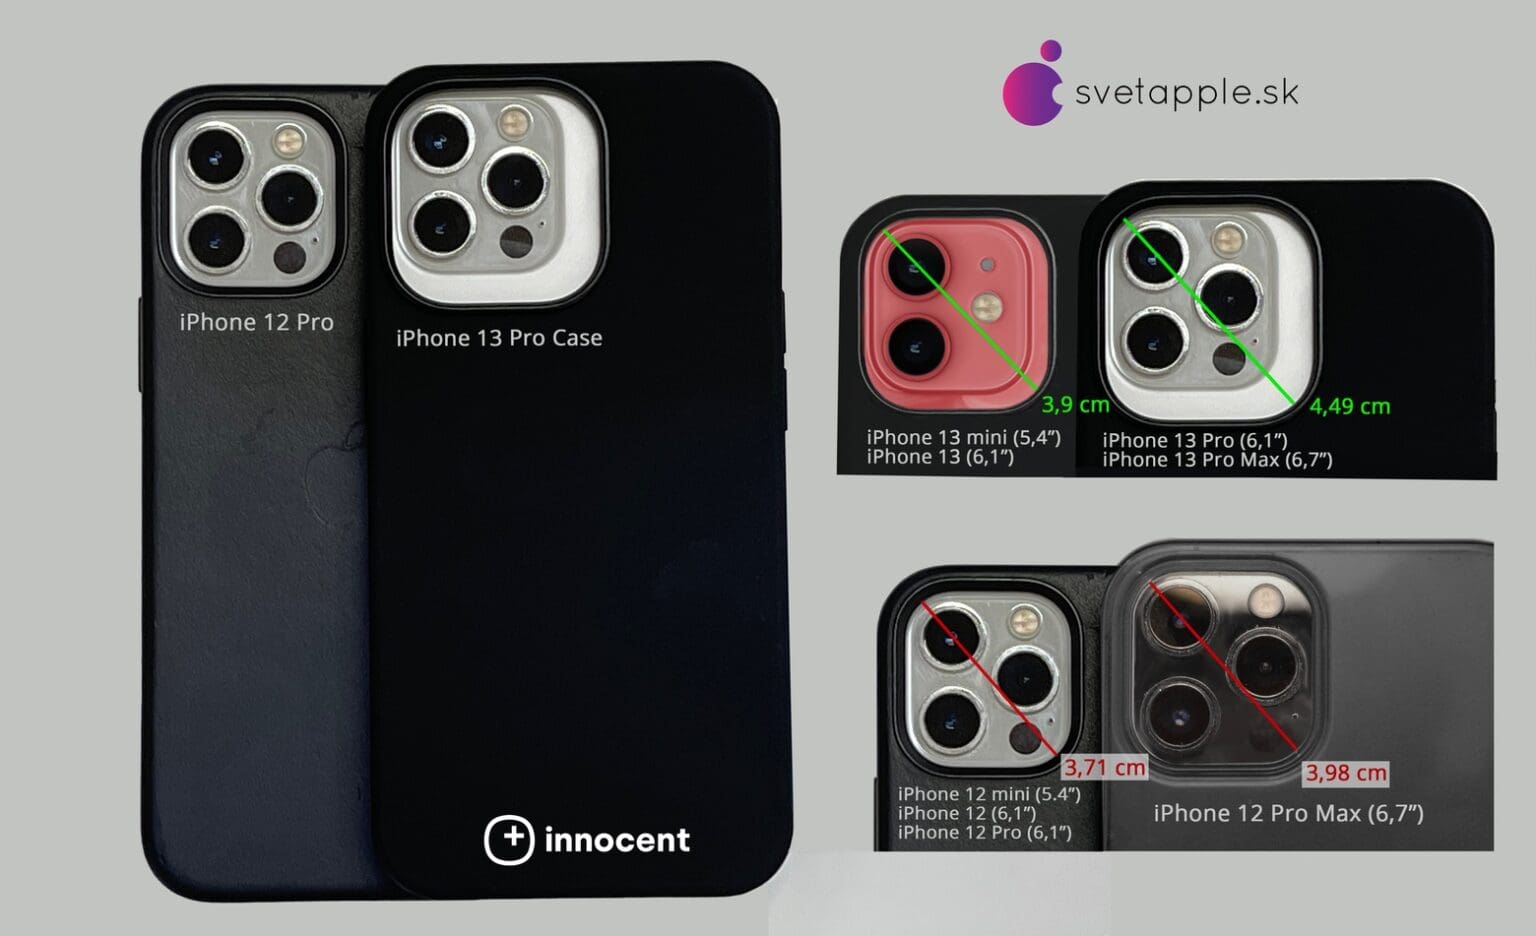 Early iPhone 13 case shows design changes to cameras, notch and buttons